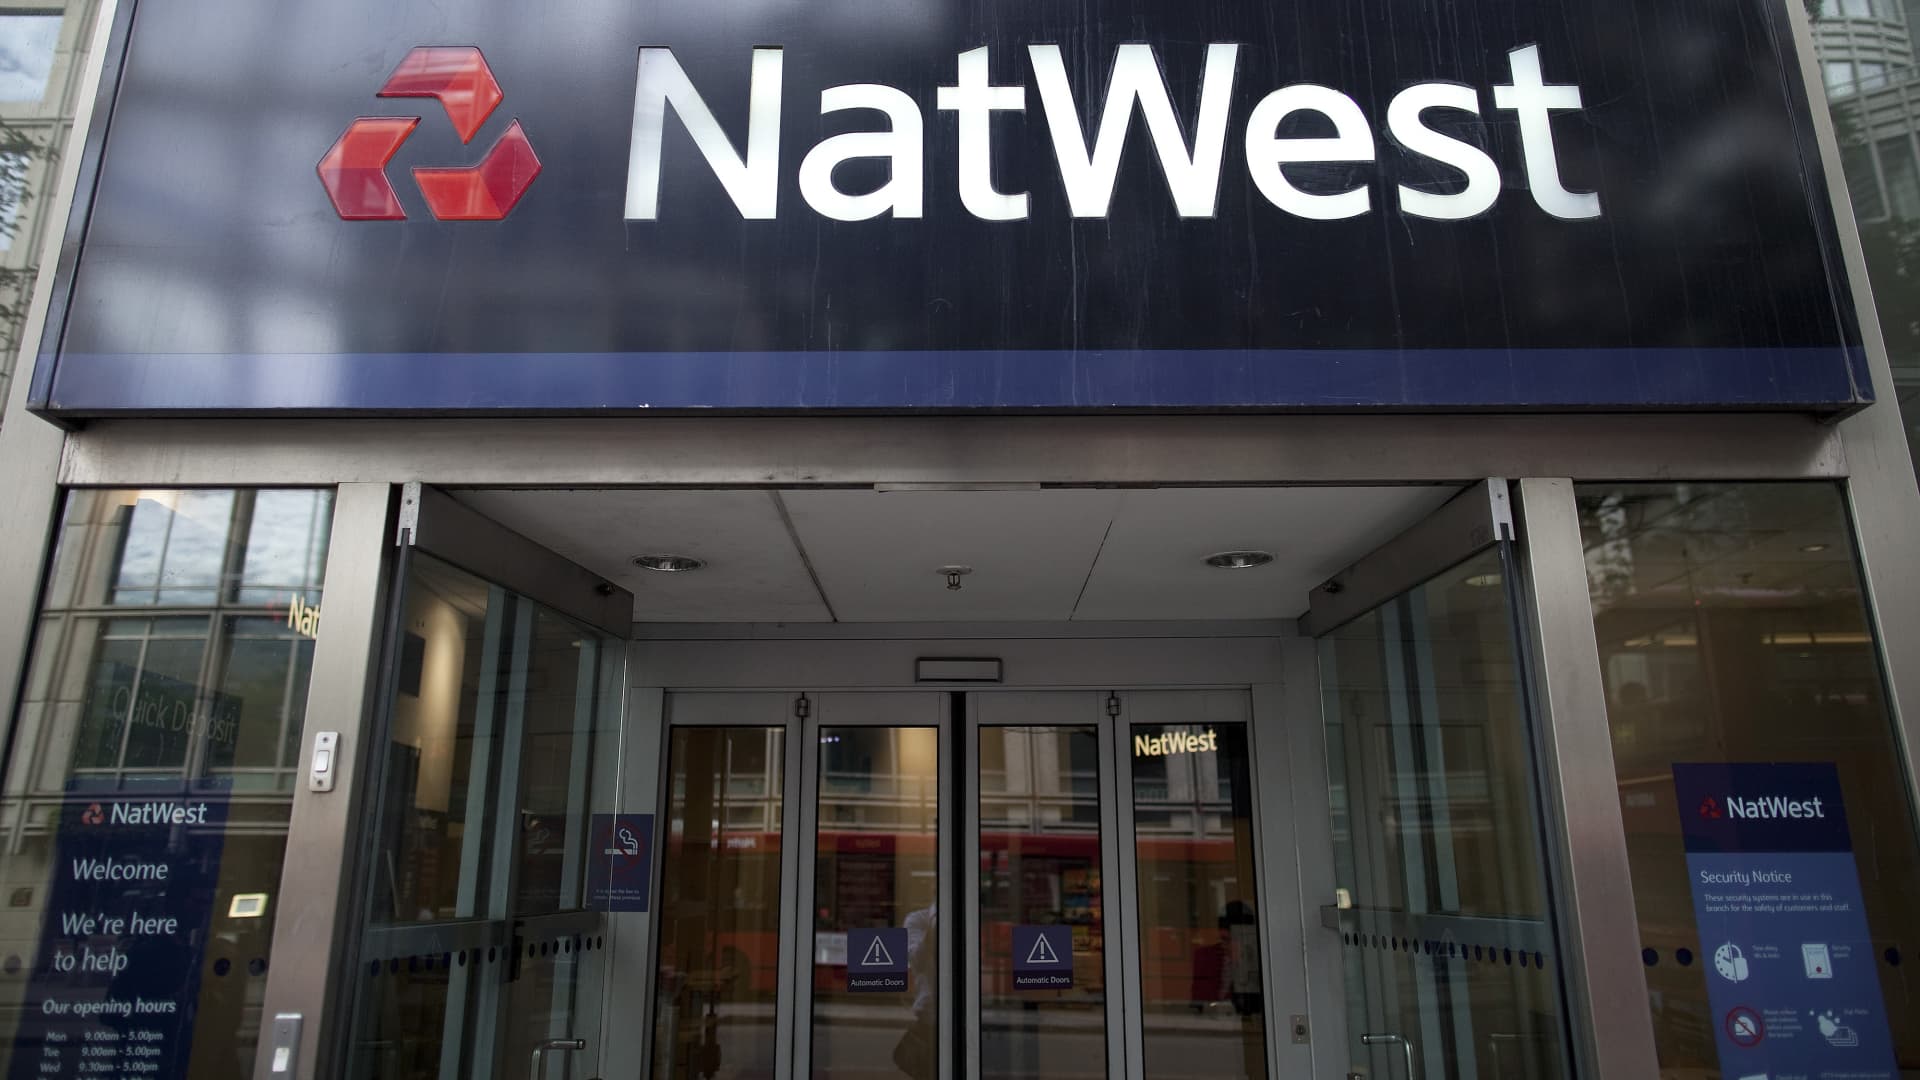 NatWest profit jumps 20% as Thwaite confirmed as CEO